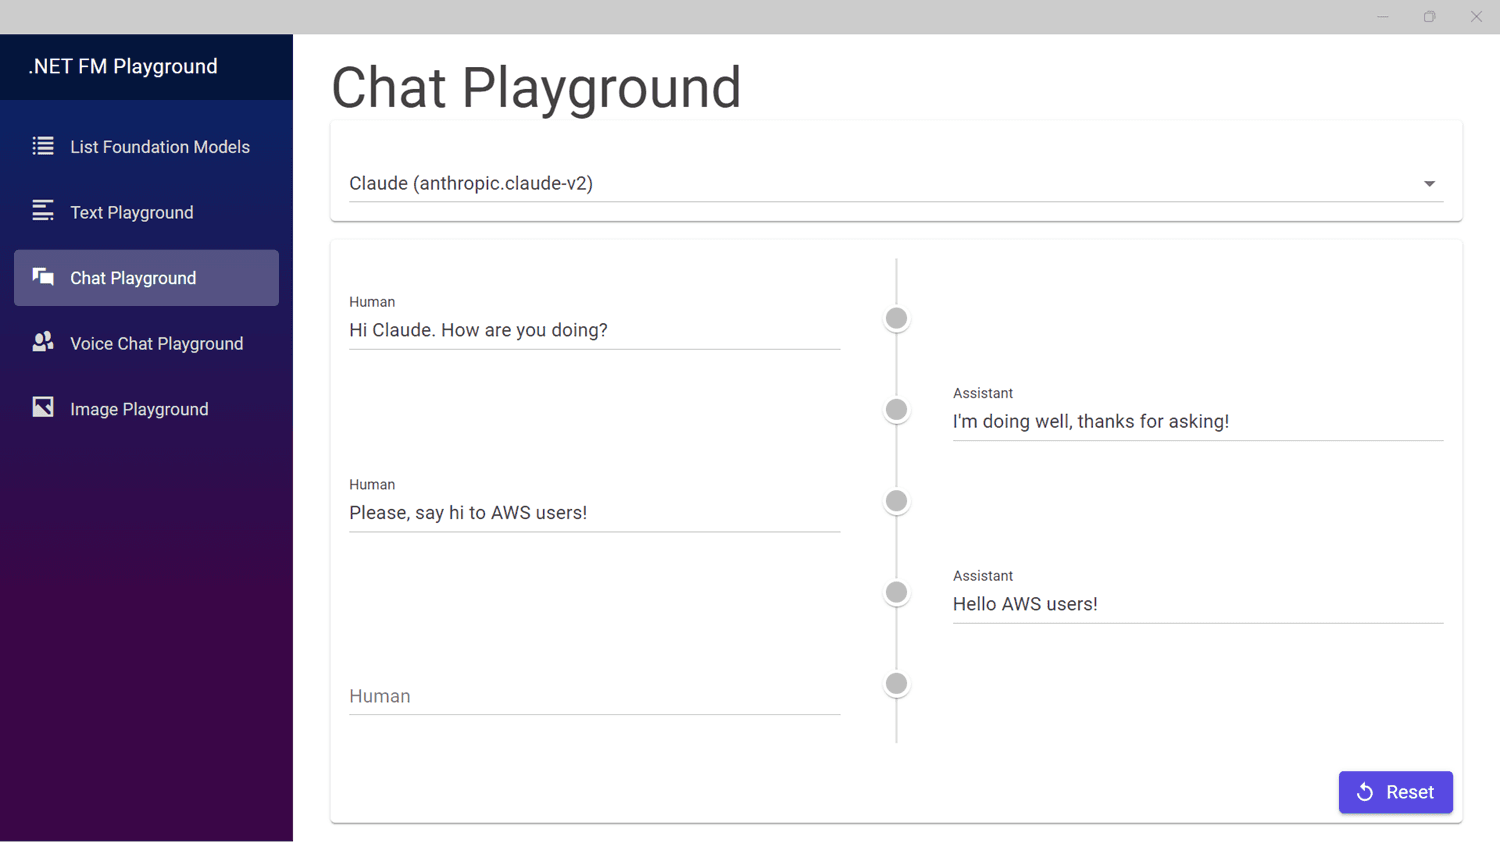 Chat playground view of the .NET FM Playground sample app